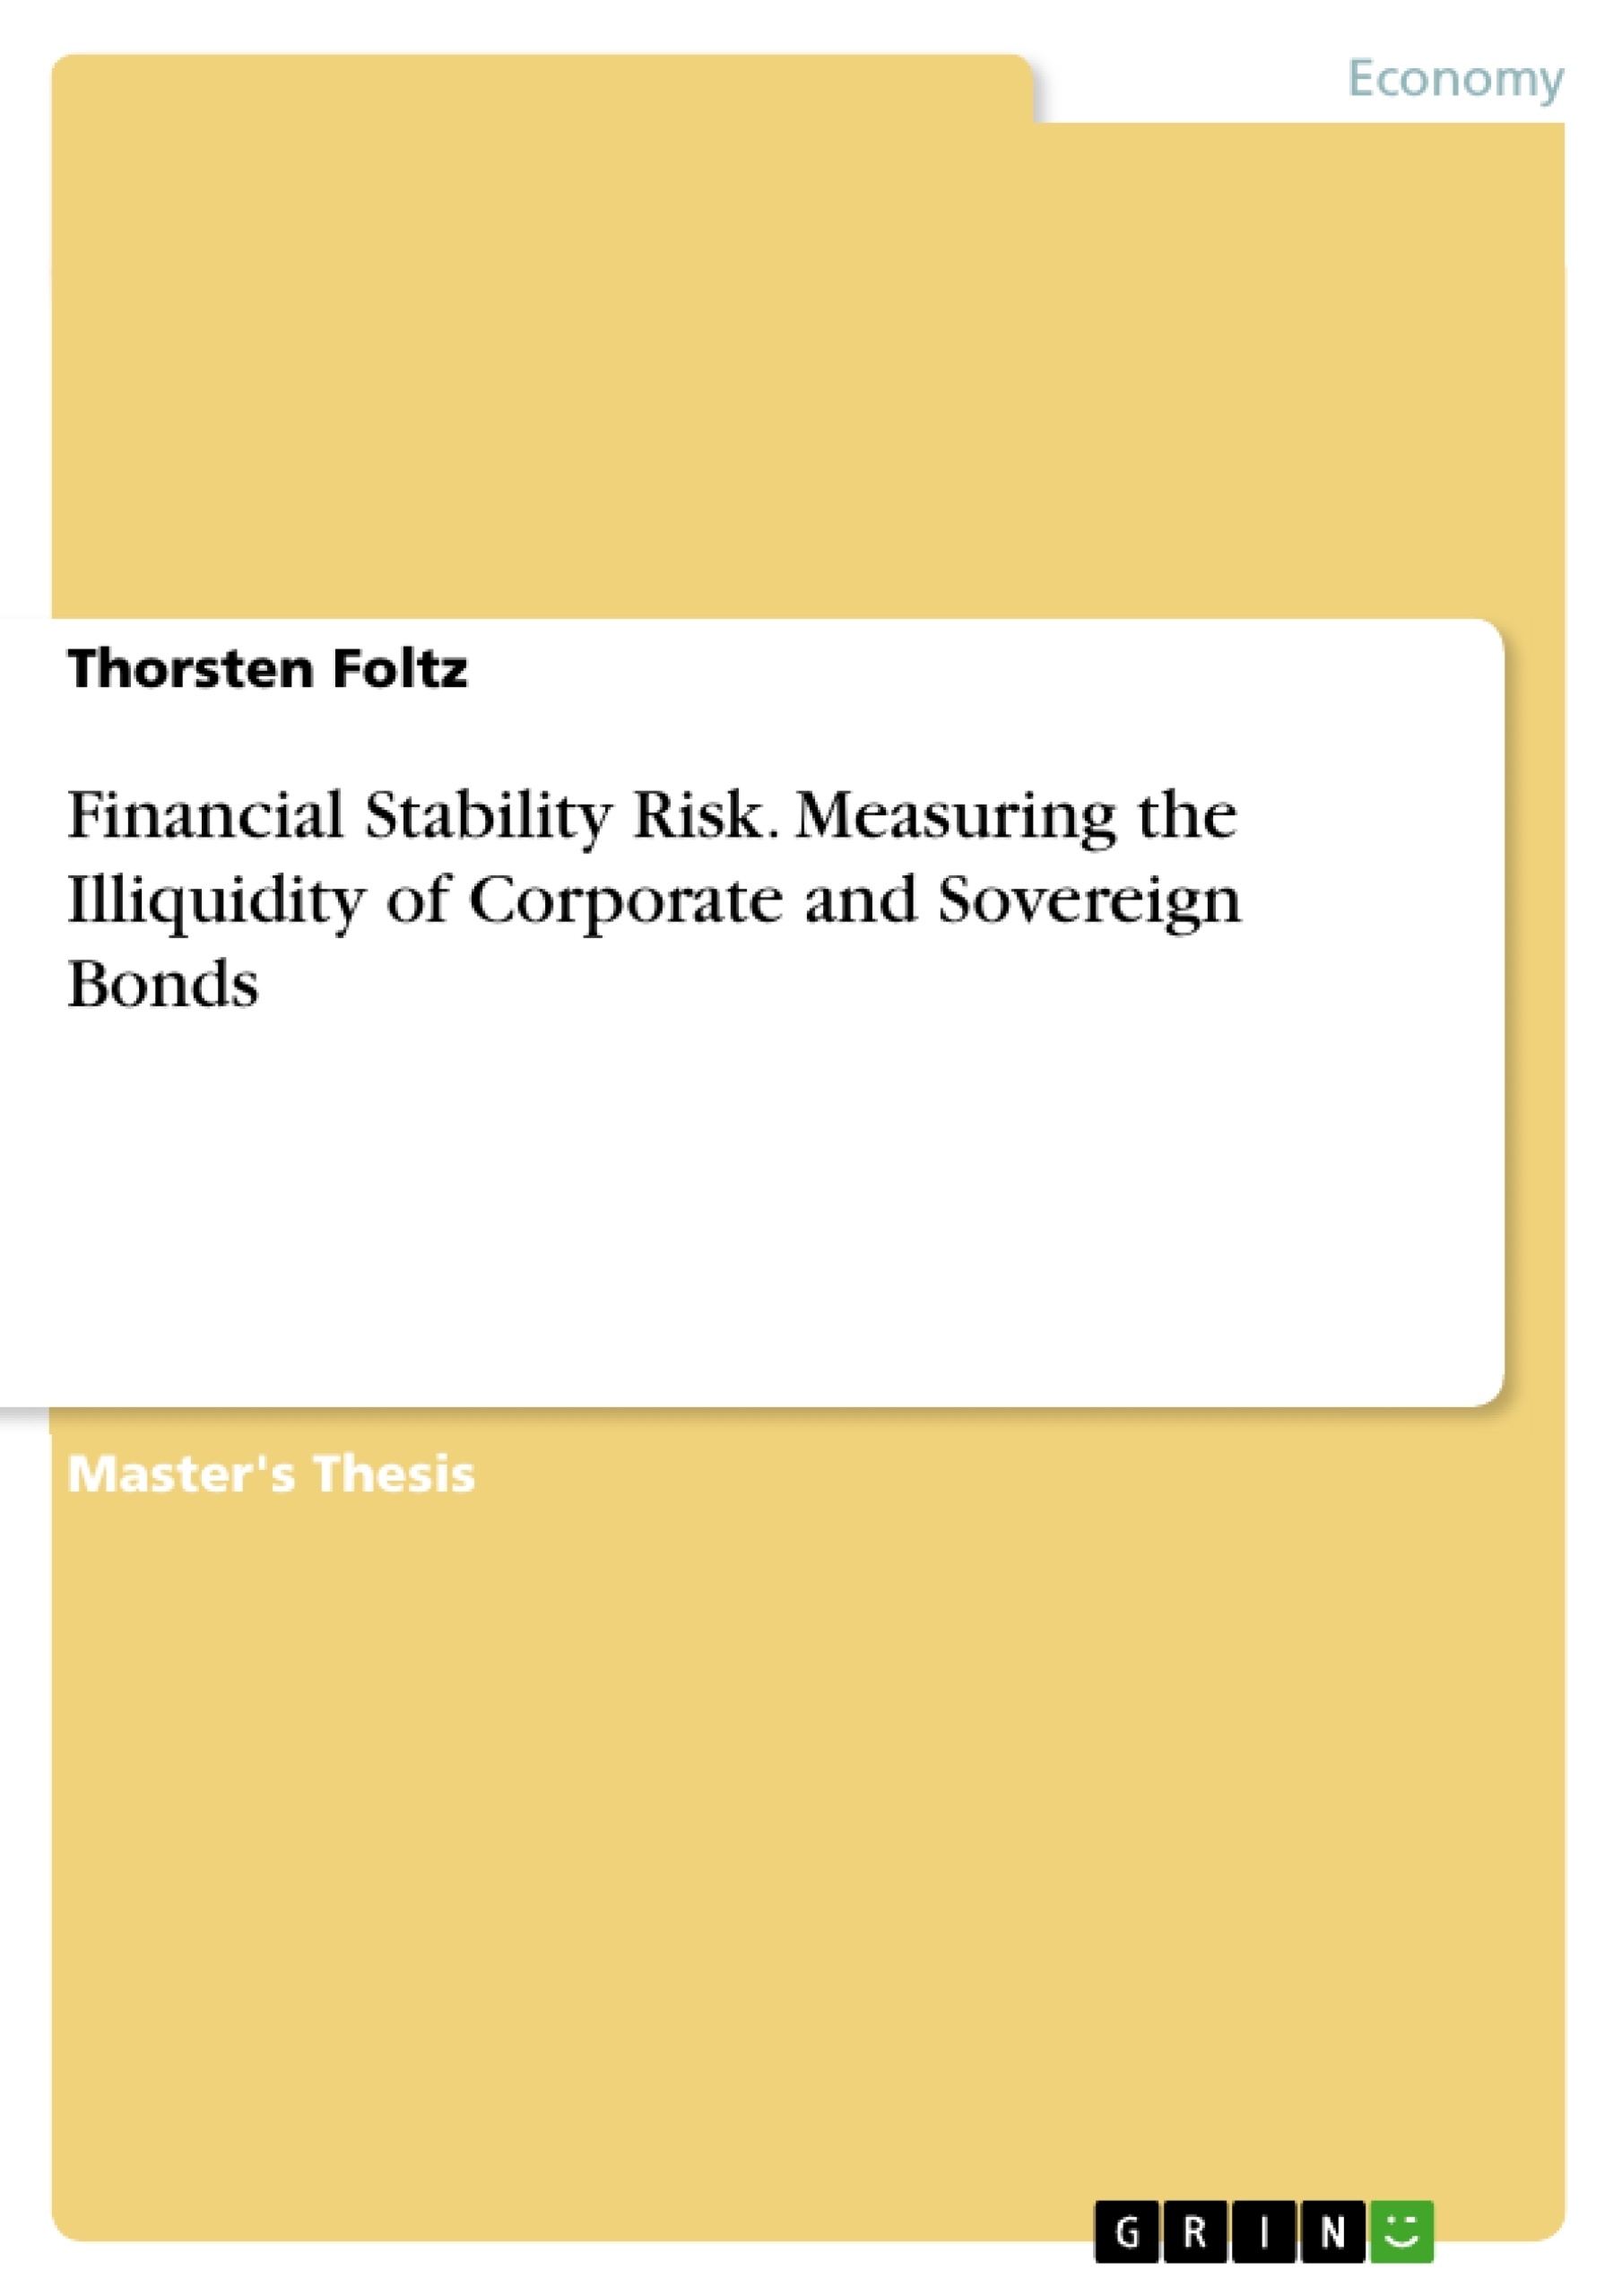 Title: Financial Stability Risk. Measuring the Illiquidity of Corporate and Sovereign Bonds